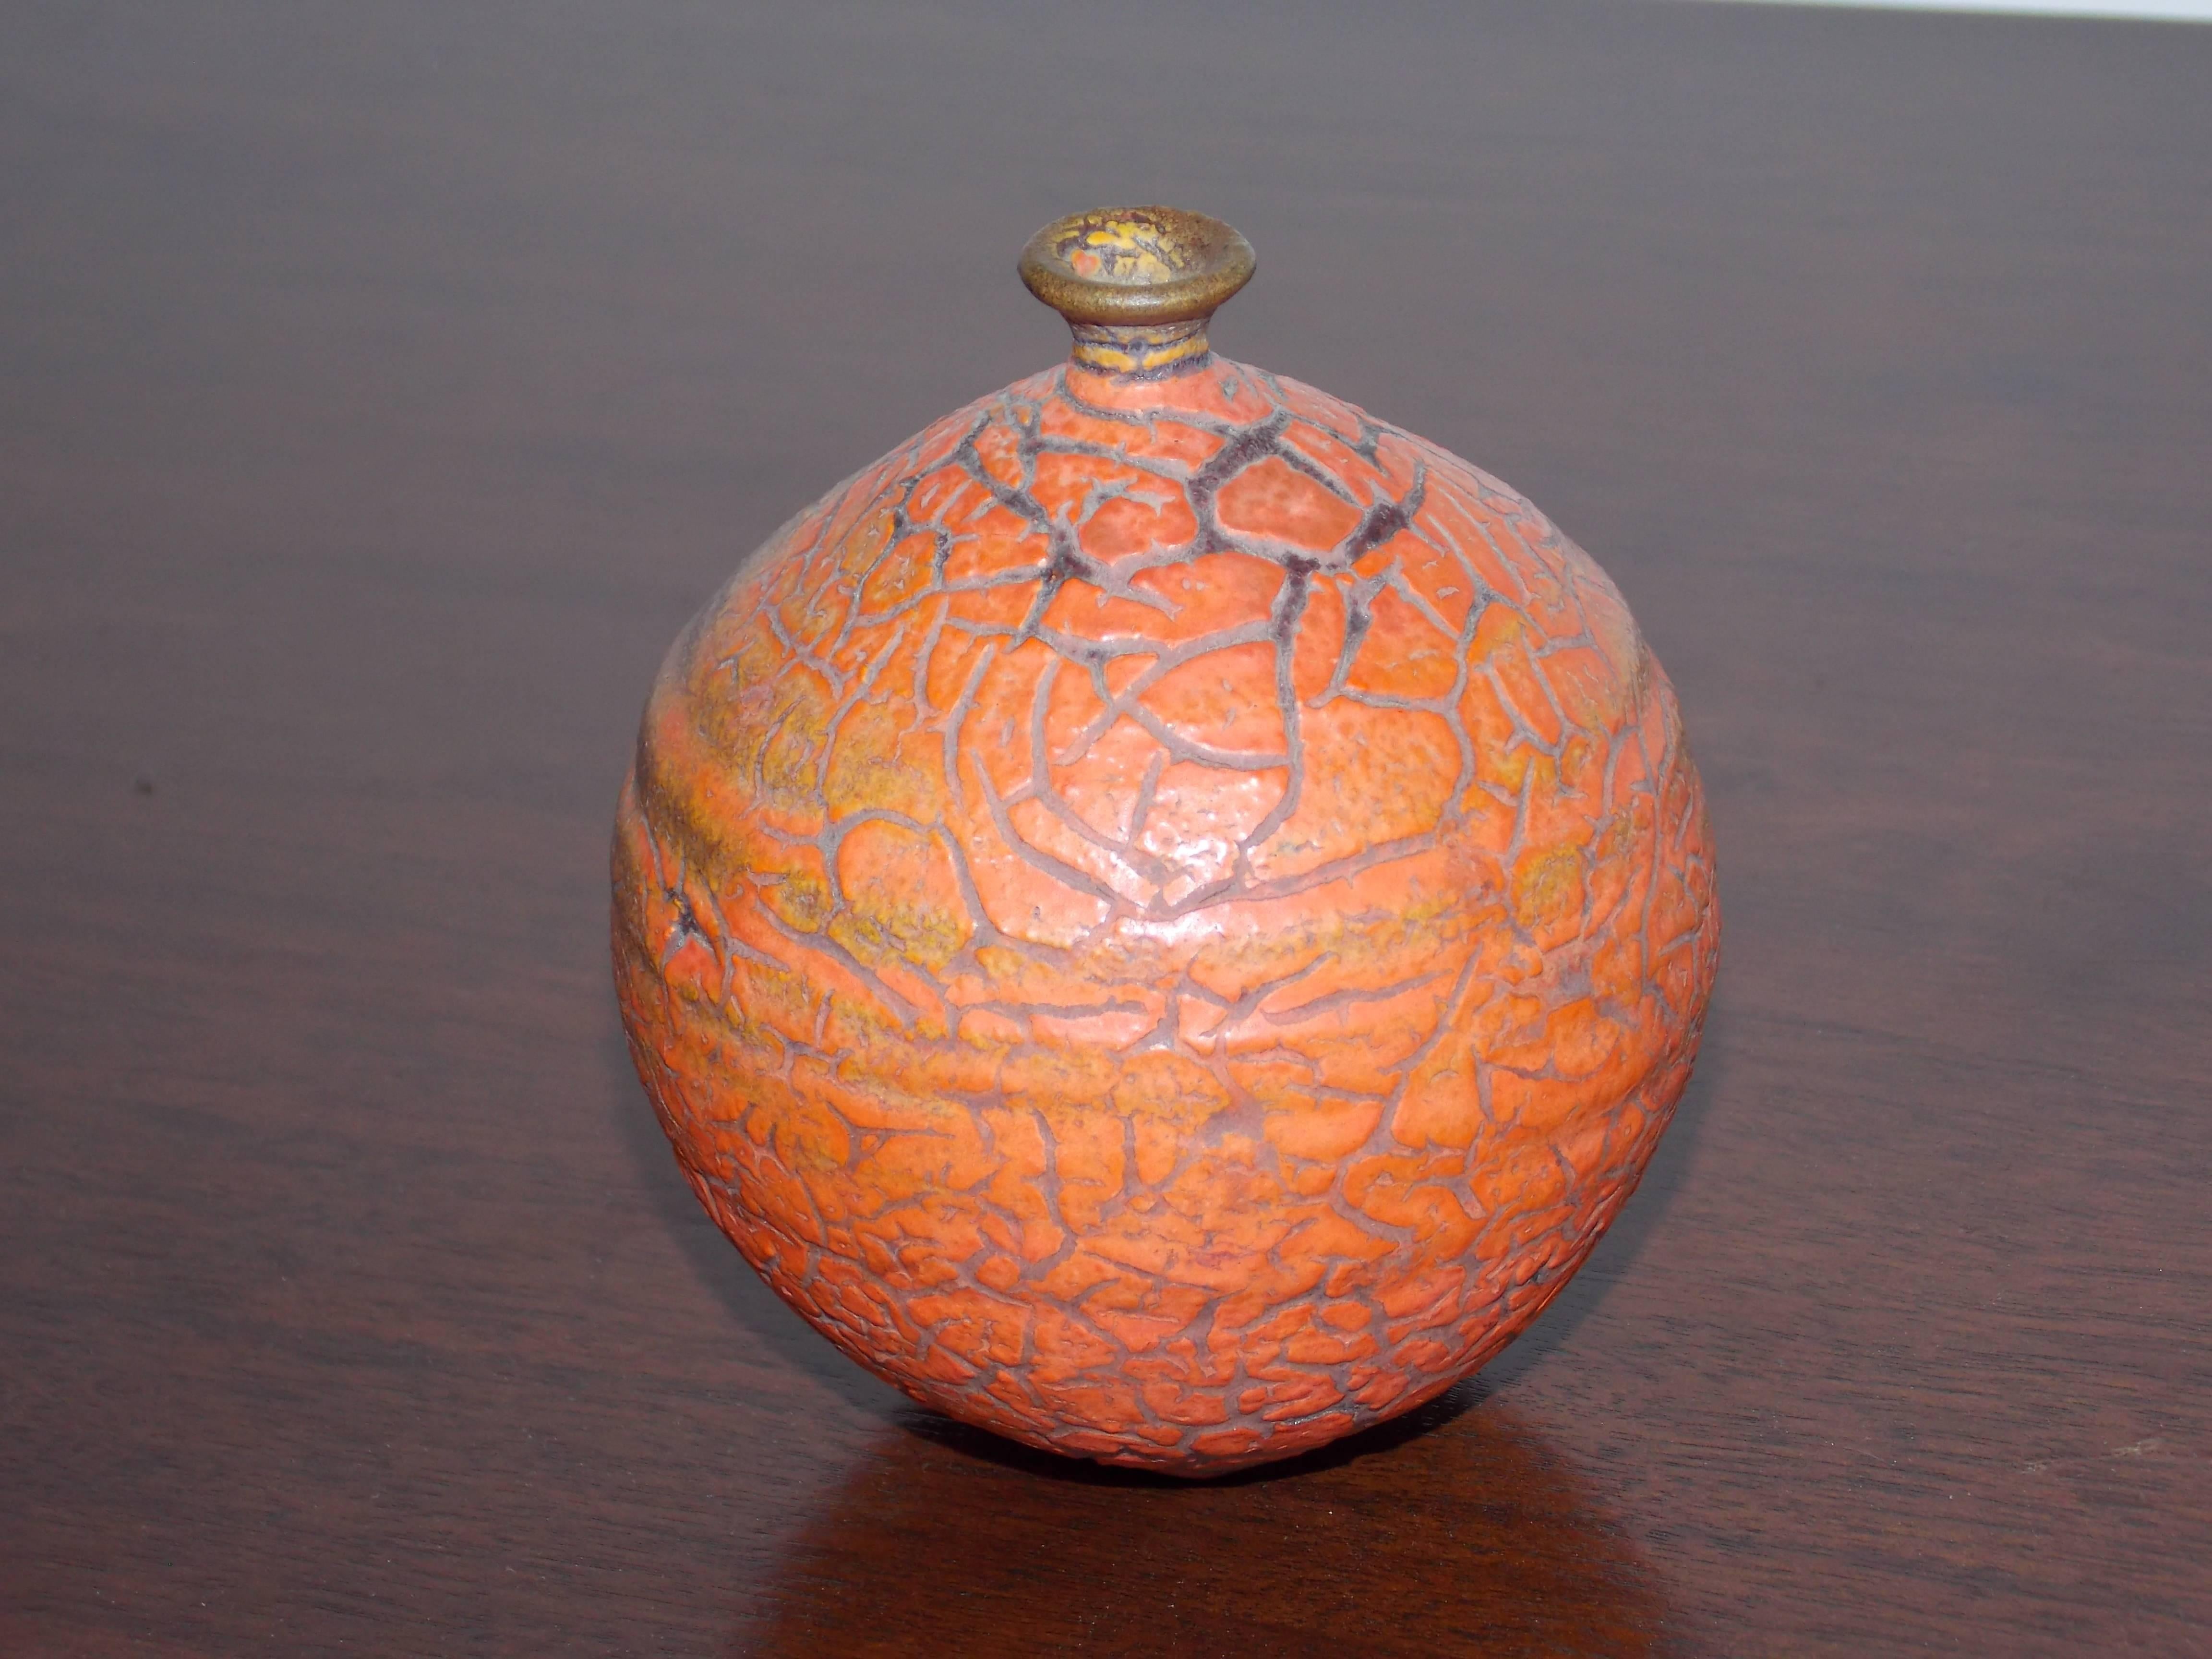 1925-2002.
Wheel thrown clay with a beautiful orange peel crackle glaze.
This piece is an exceptional example of Lane's signature style and technique.
It's one of a kind.
No chips, cracks or repairs. 
Add to a collection of these fine nuggets